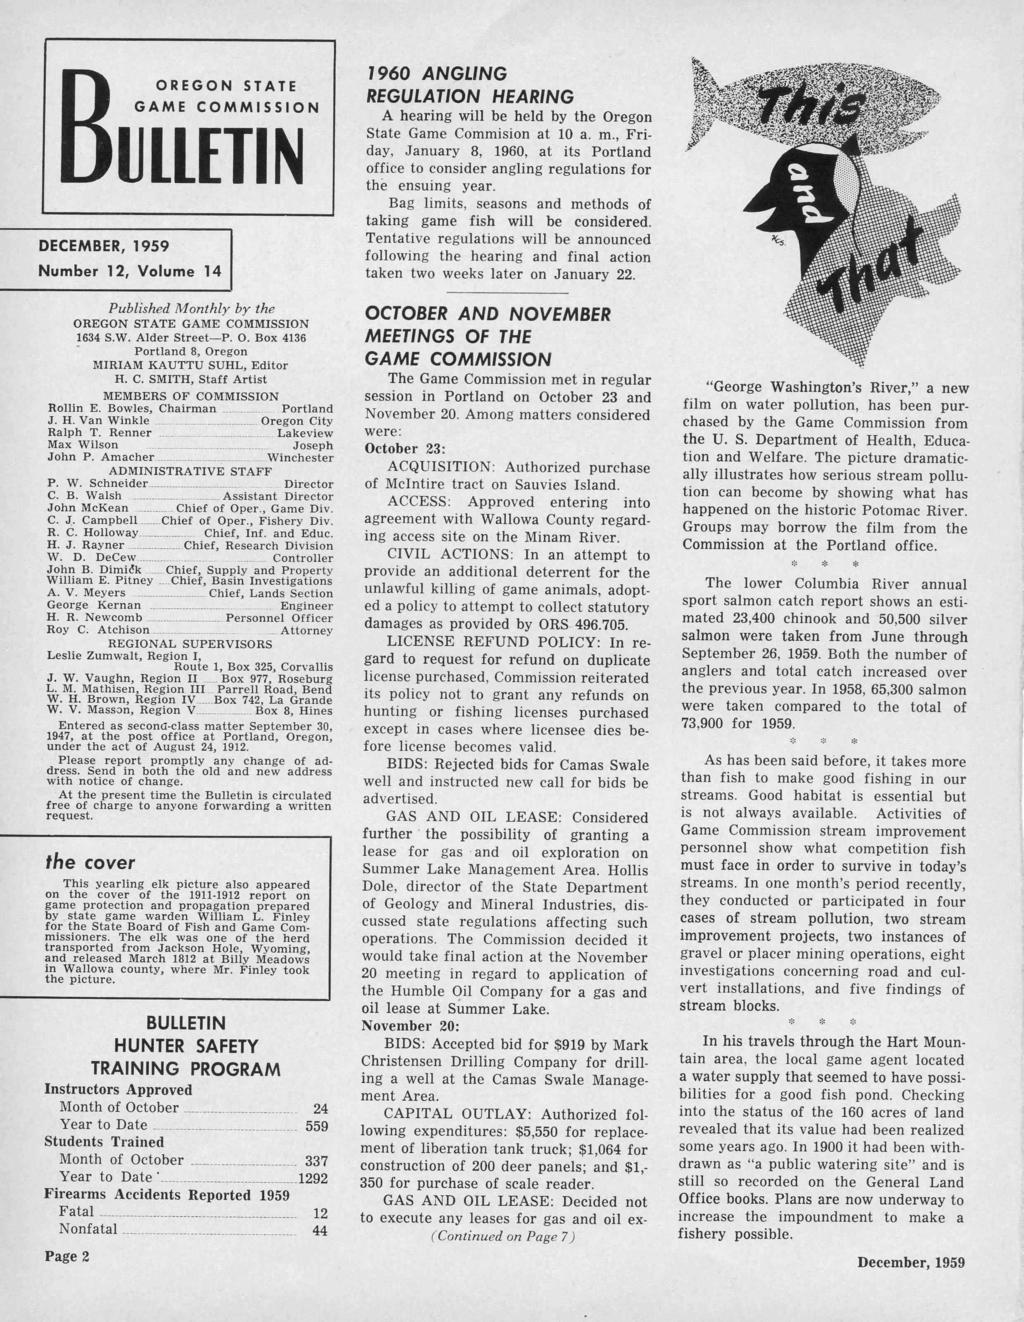 STATET A TE GAME COMMISSION ULLETIN DECEMBER, 1959 Number 12, Volume 14 1960 ANGLING REGULATION HEARING A hearing will be held by the Oregon State Game Commision at 10 a. m.